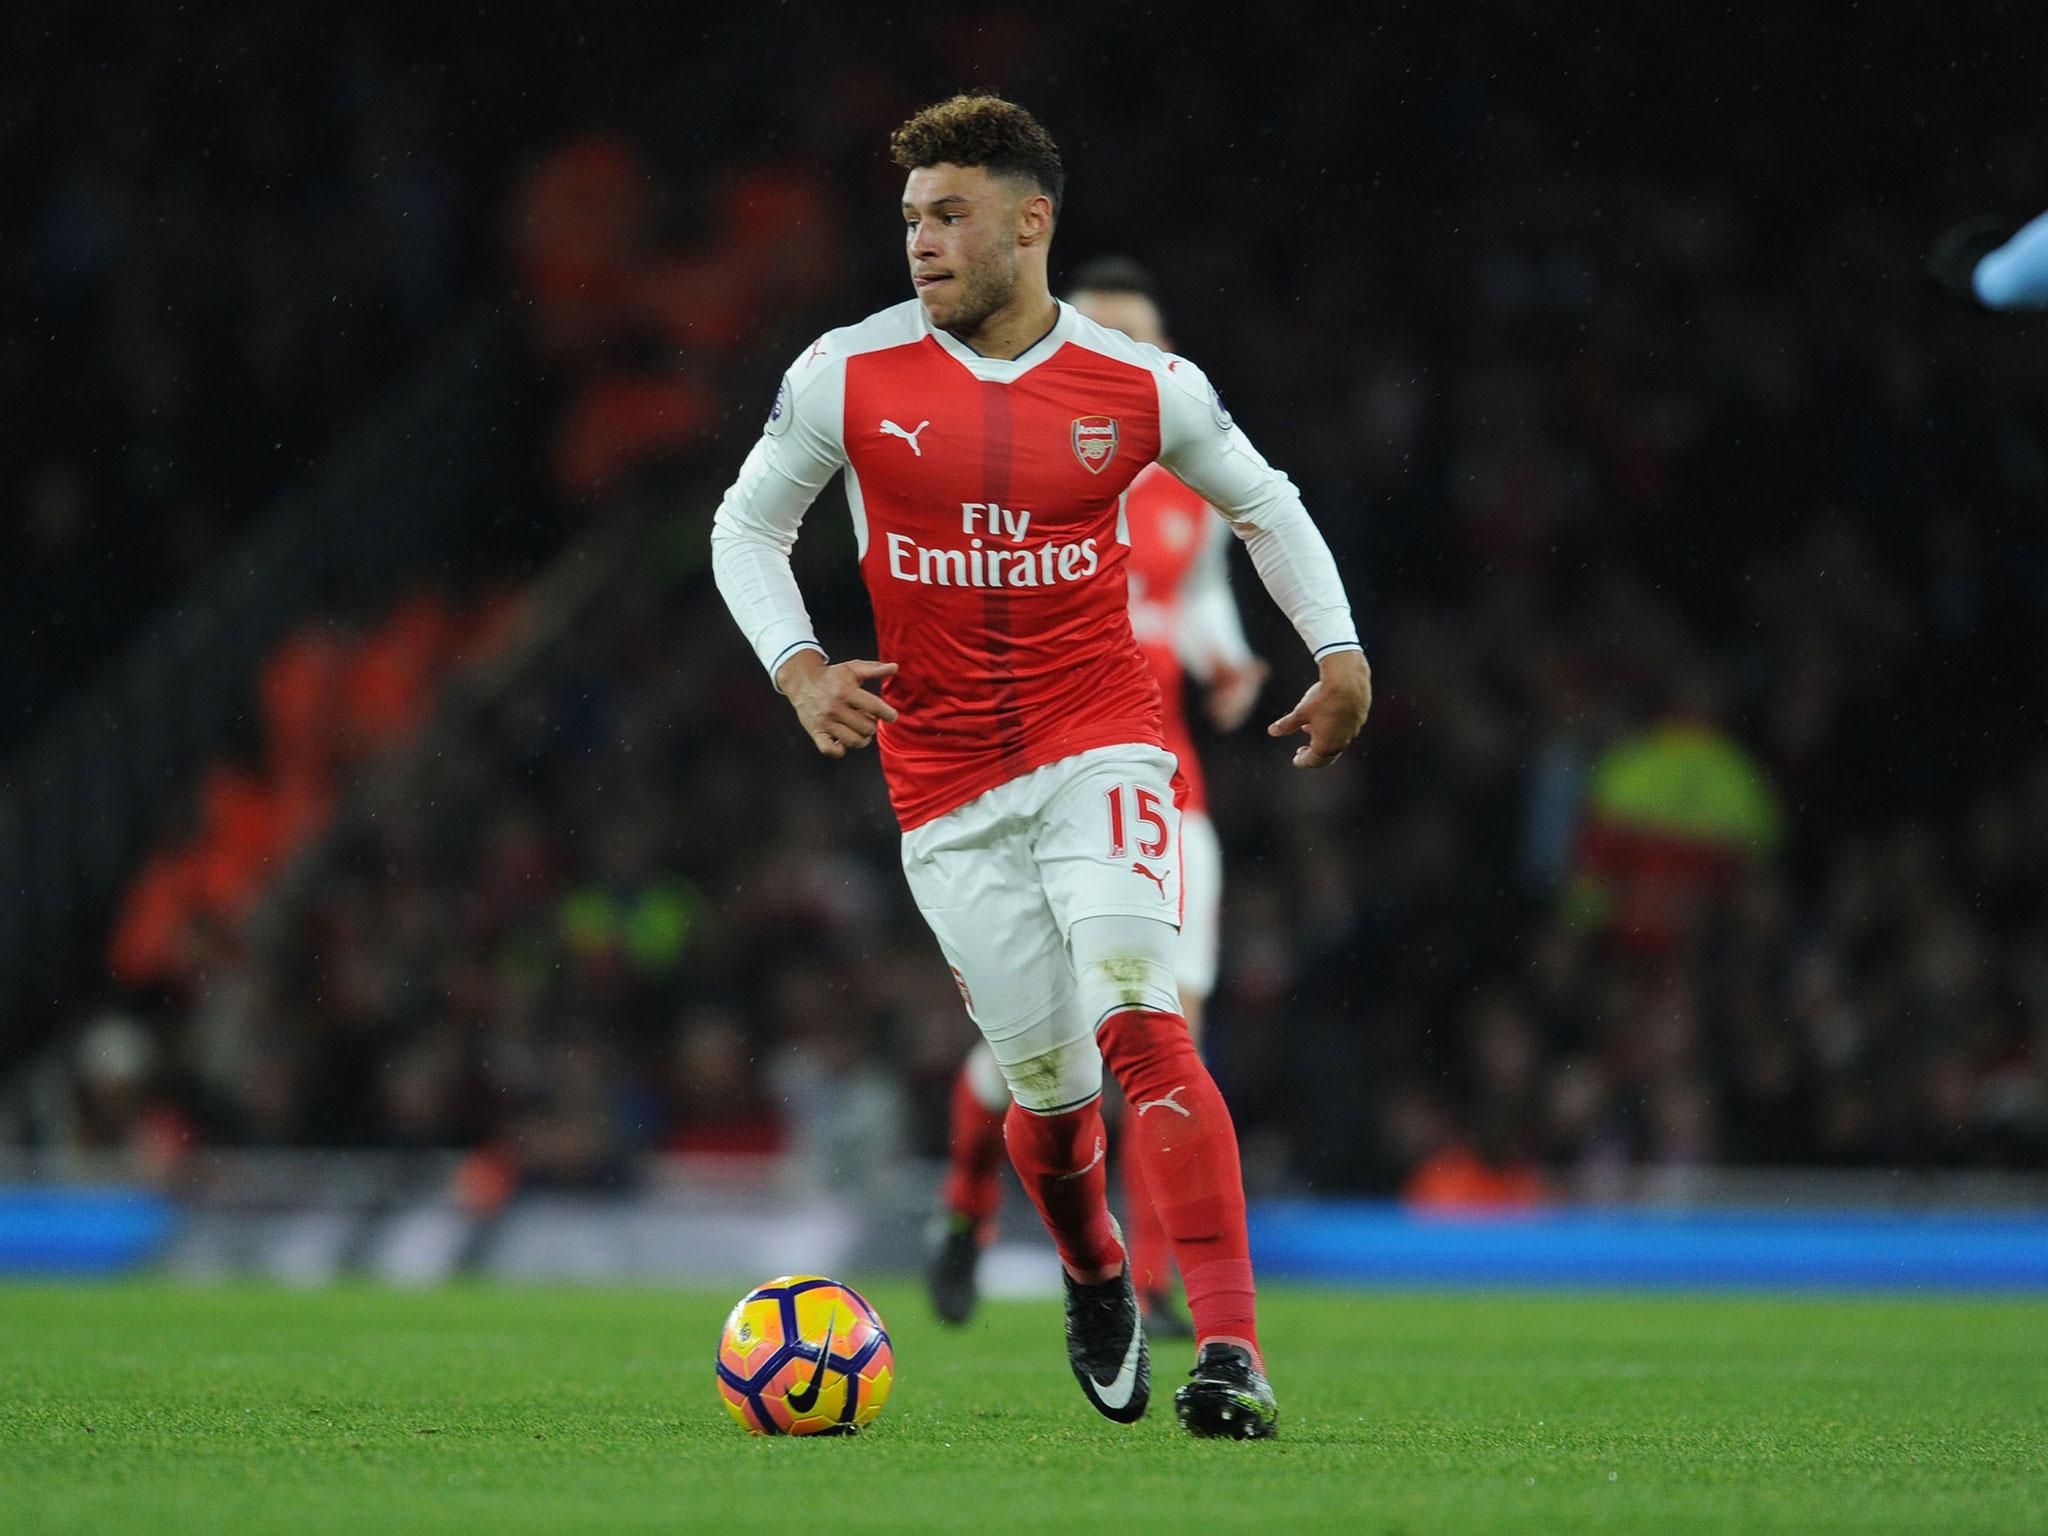 Alex Oxlade-Chamberlain is a January transfer target for Liverpool